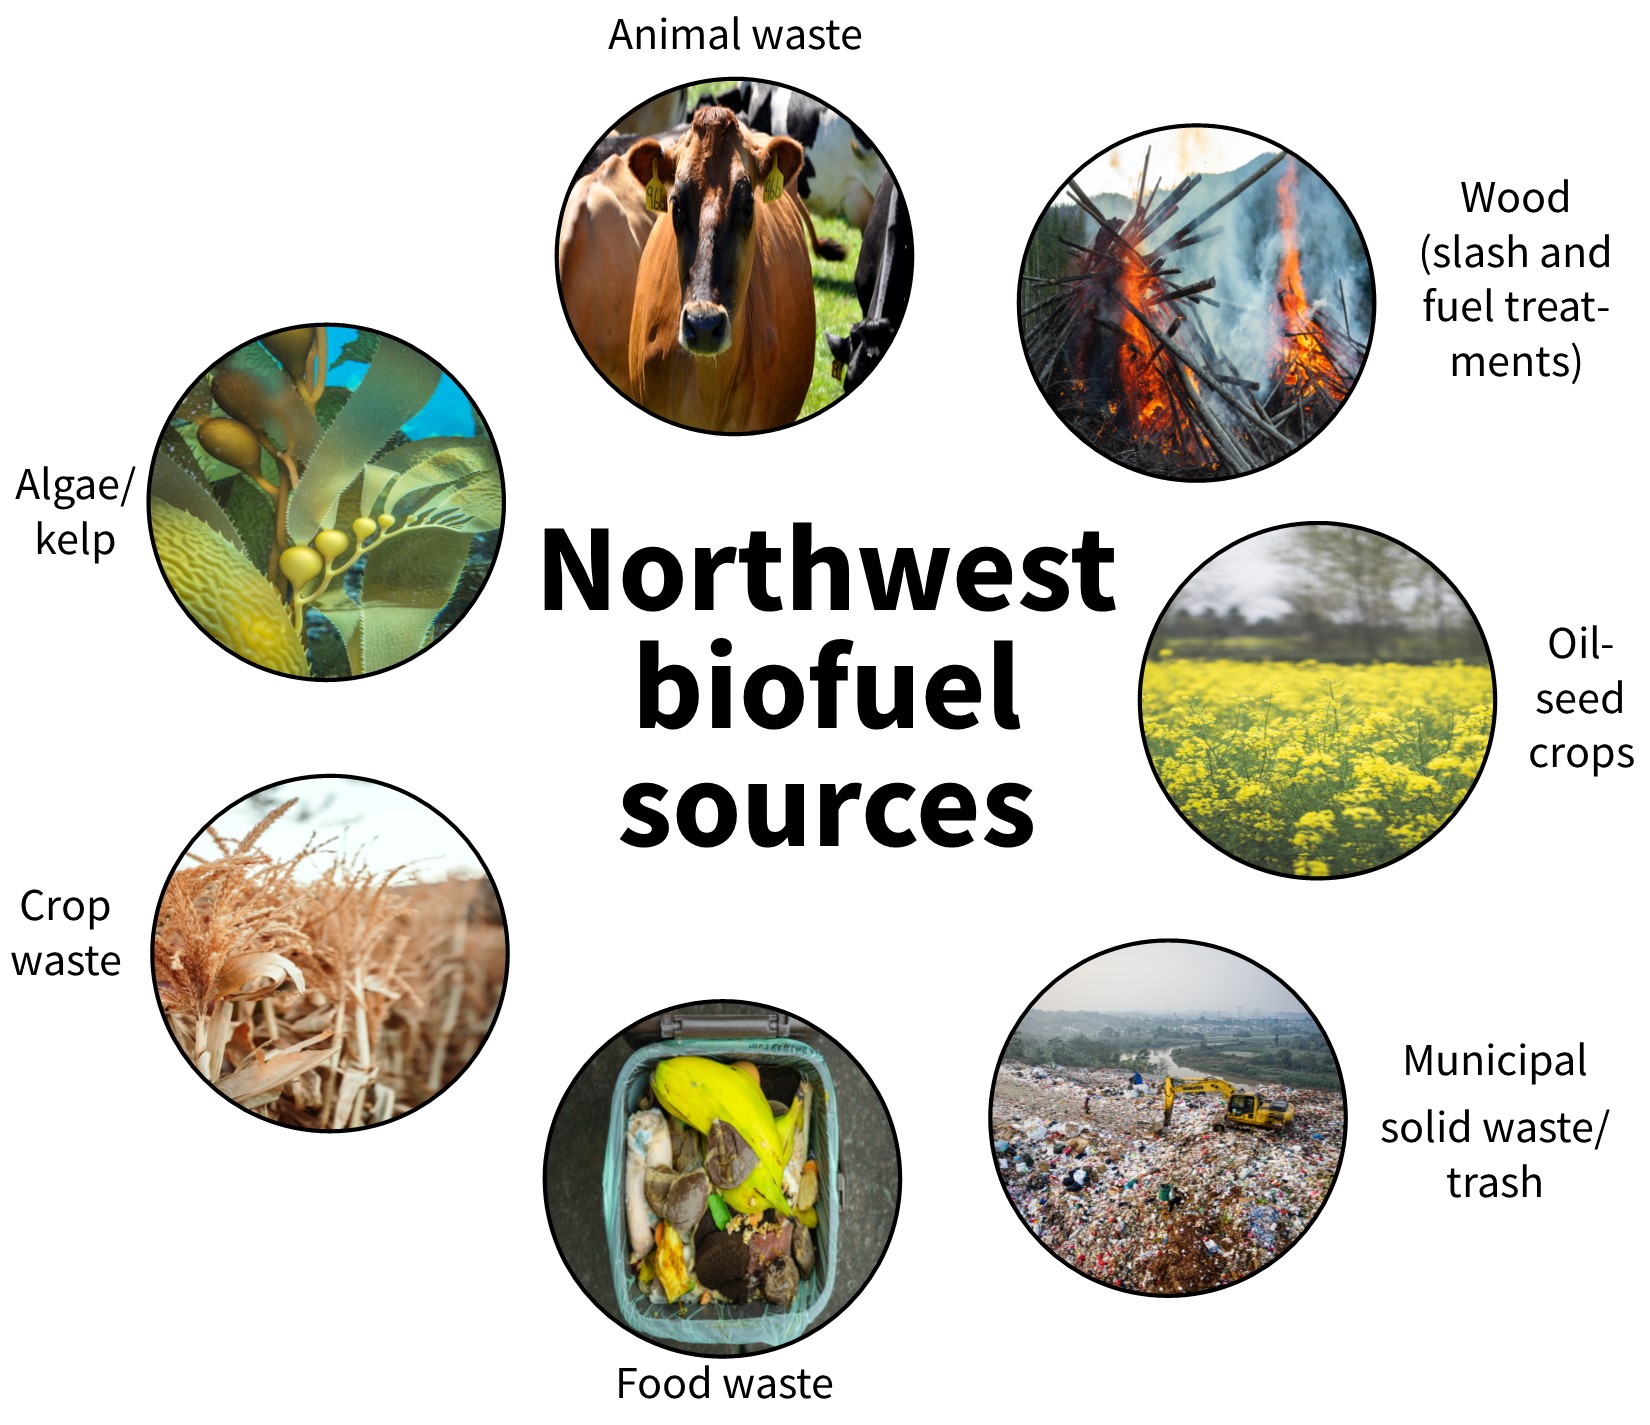 Seven images of biofuel sources in the northwest (animal waste, wood, oilseed crops, municipal solid waste/trash, food waste, crop waste, algae/kelp). Attribution: Clockwise starting with the image of a cow: NRCS Oregon, Everett Bumstead, Cz Jen, Tom Fisk, Gareth Willey, Merrit Thomas, National Park Service